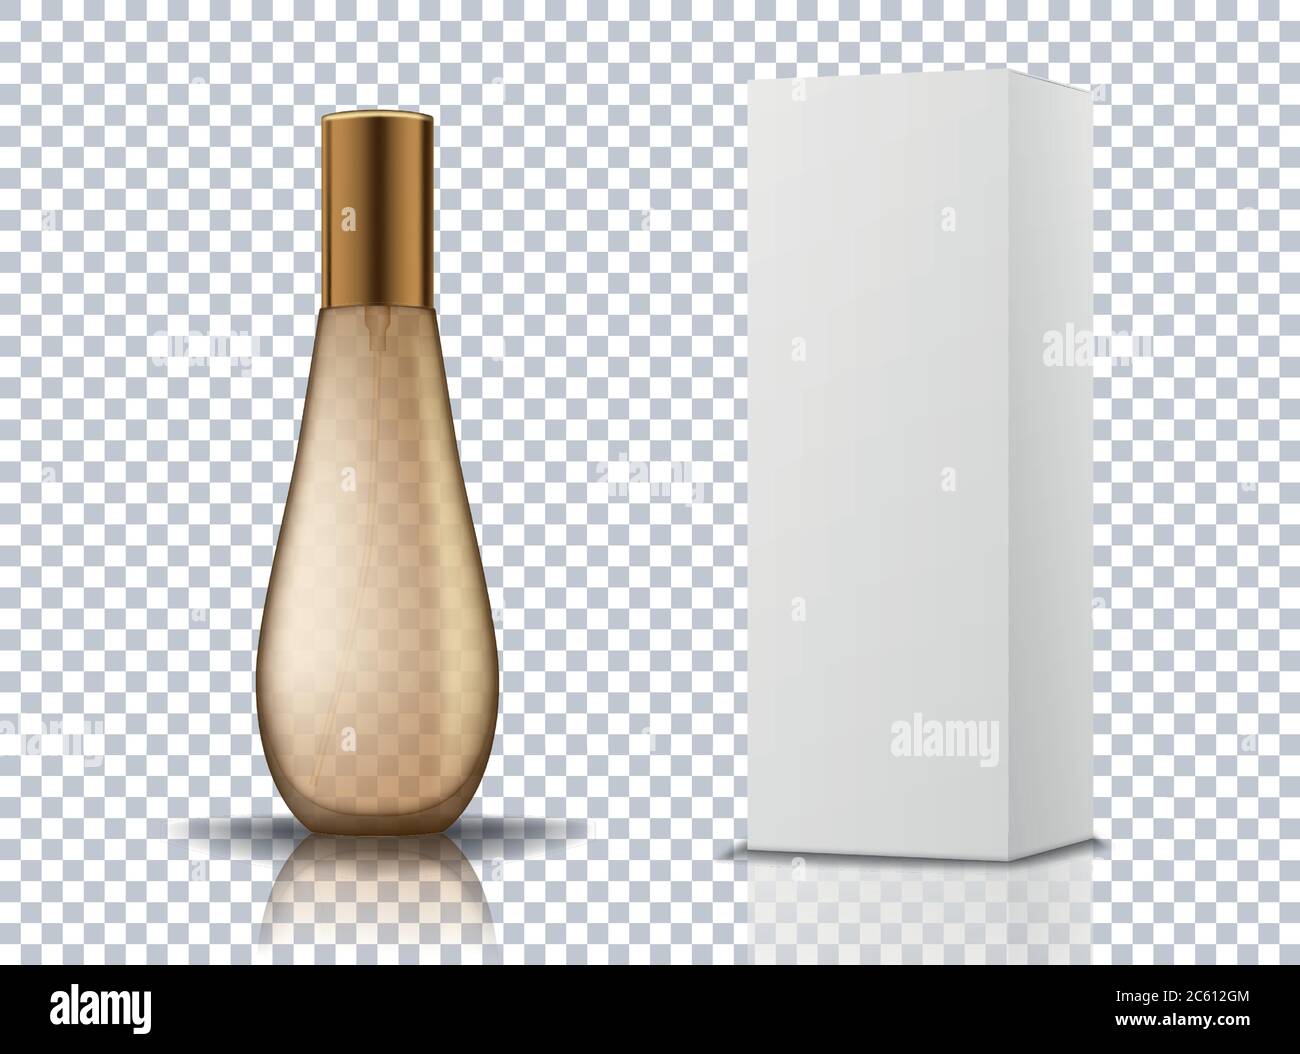 Transparent gold perfume cosmetic bottle container with white box isolated. Mockup for product package branding. Realistic vector illustration of Stock Vector